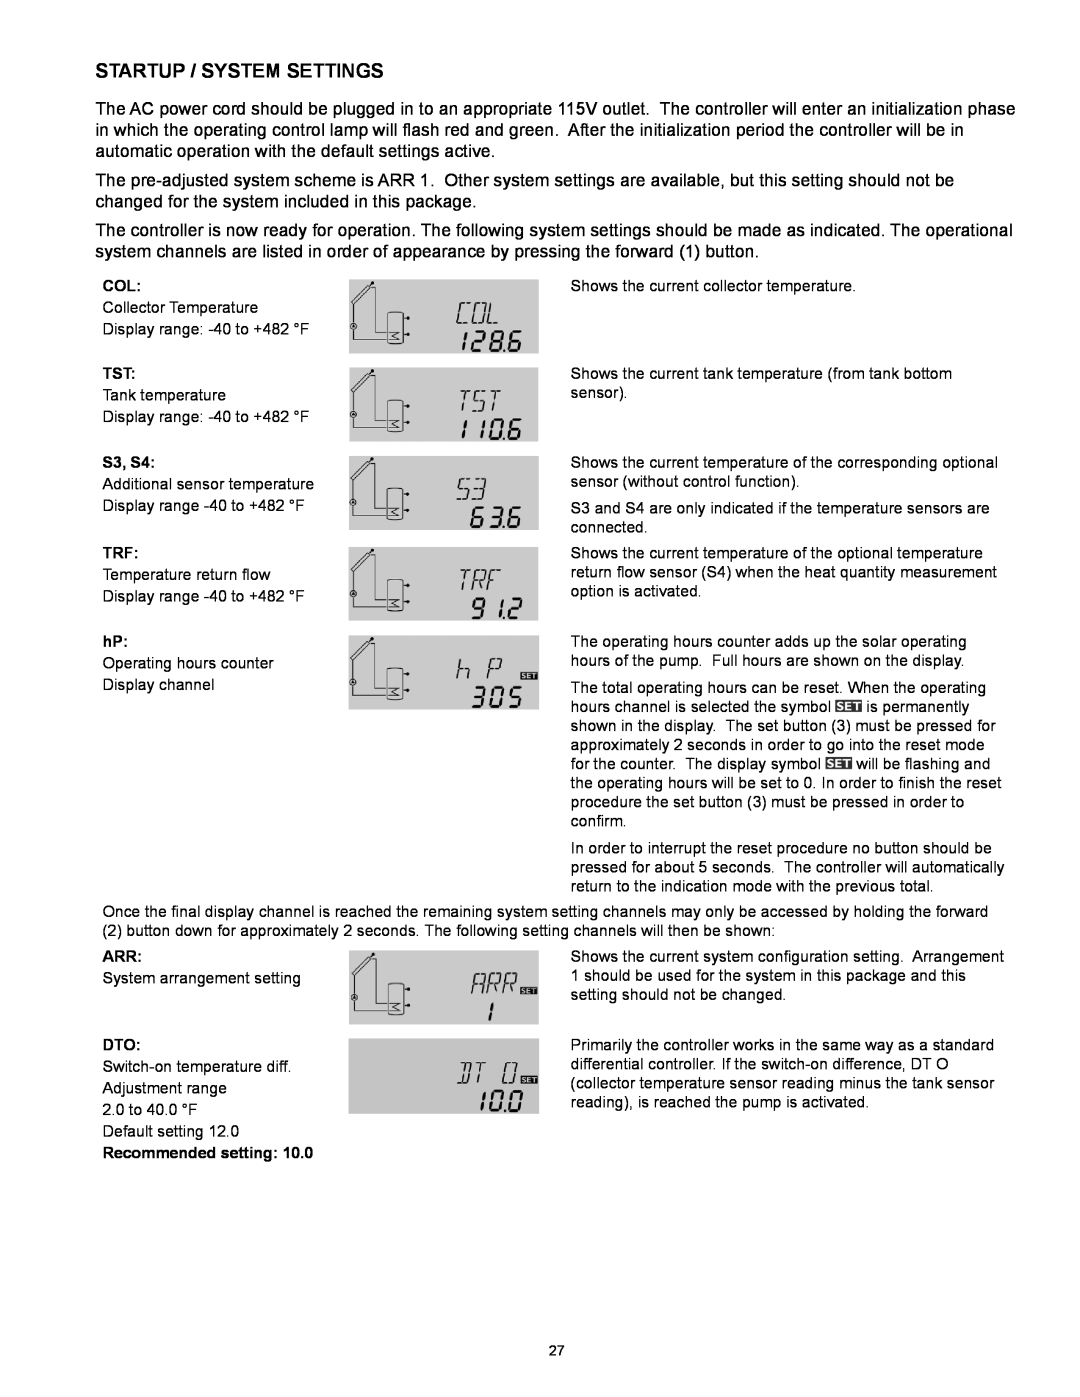 American Water Heater 318281-000 instruction manual Startup / System Settings, S3, S4, Recommended setting 